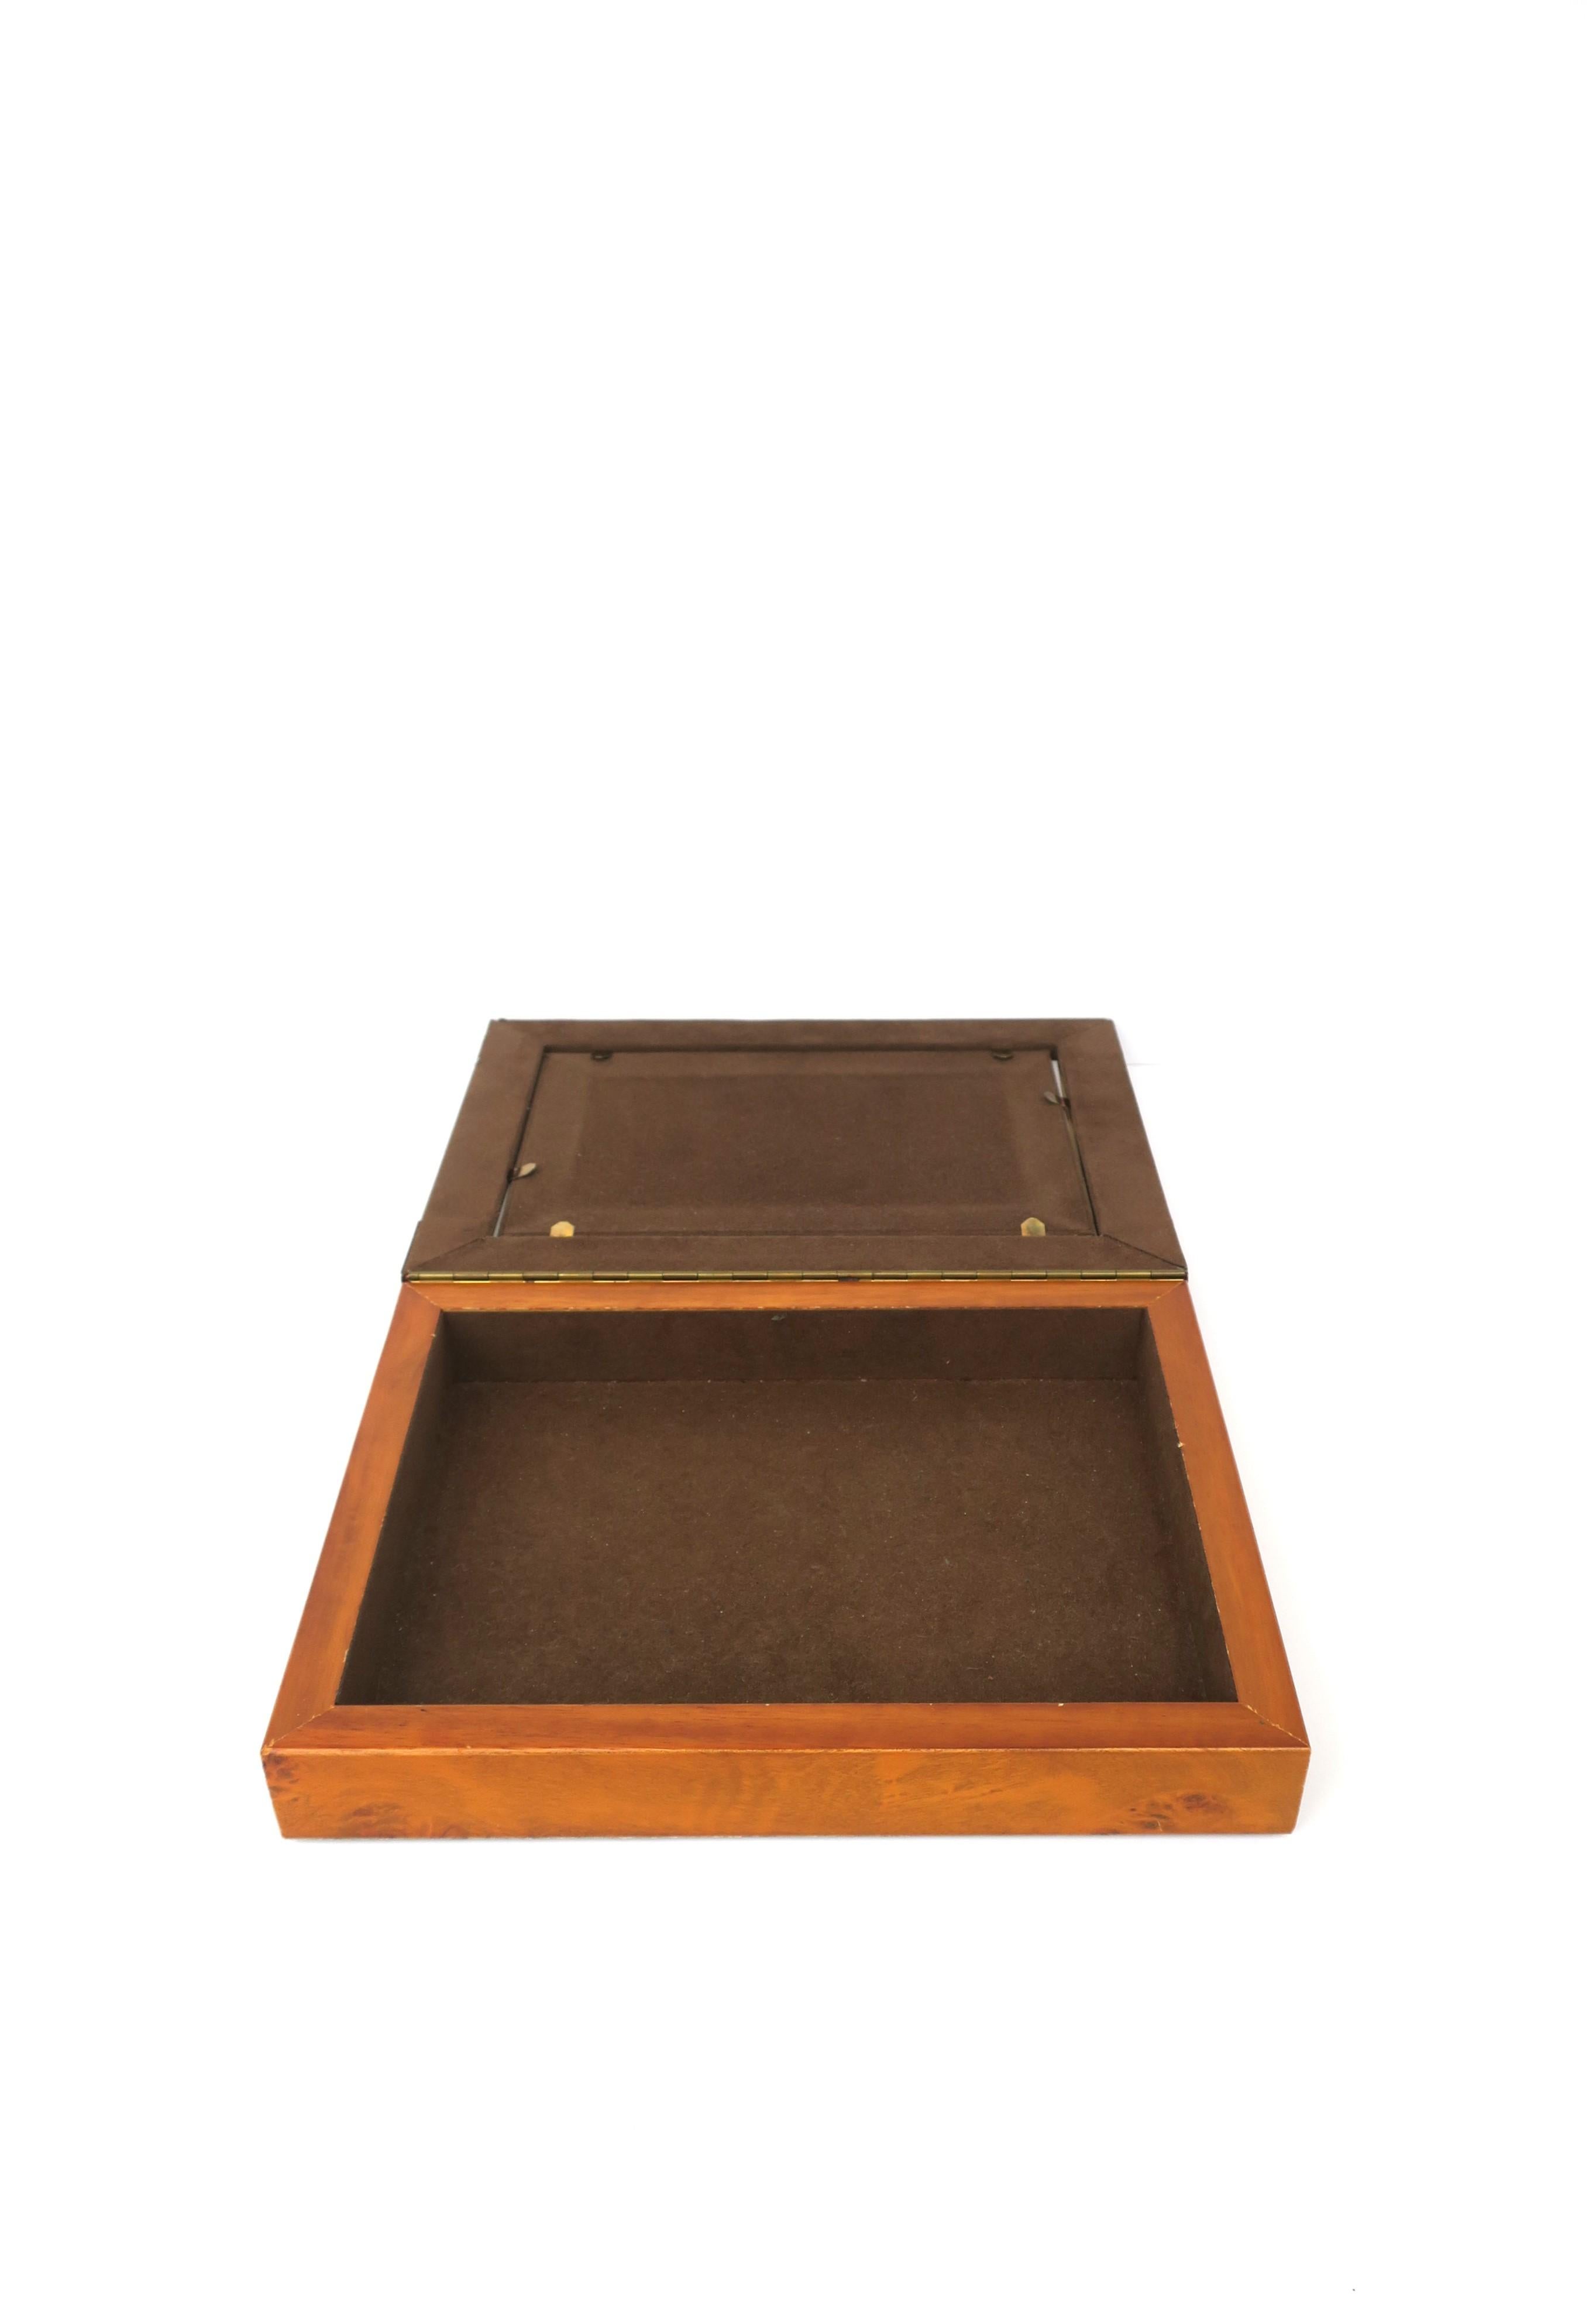 Burl Wood Jewelry Box and Picture Frame For Sale 4